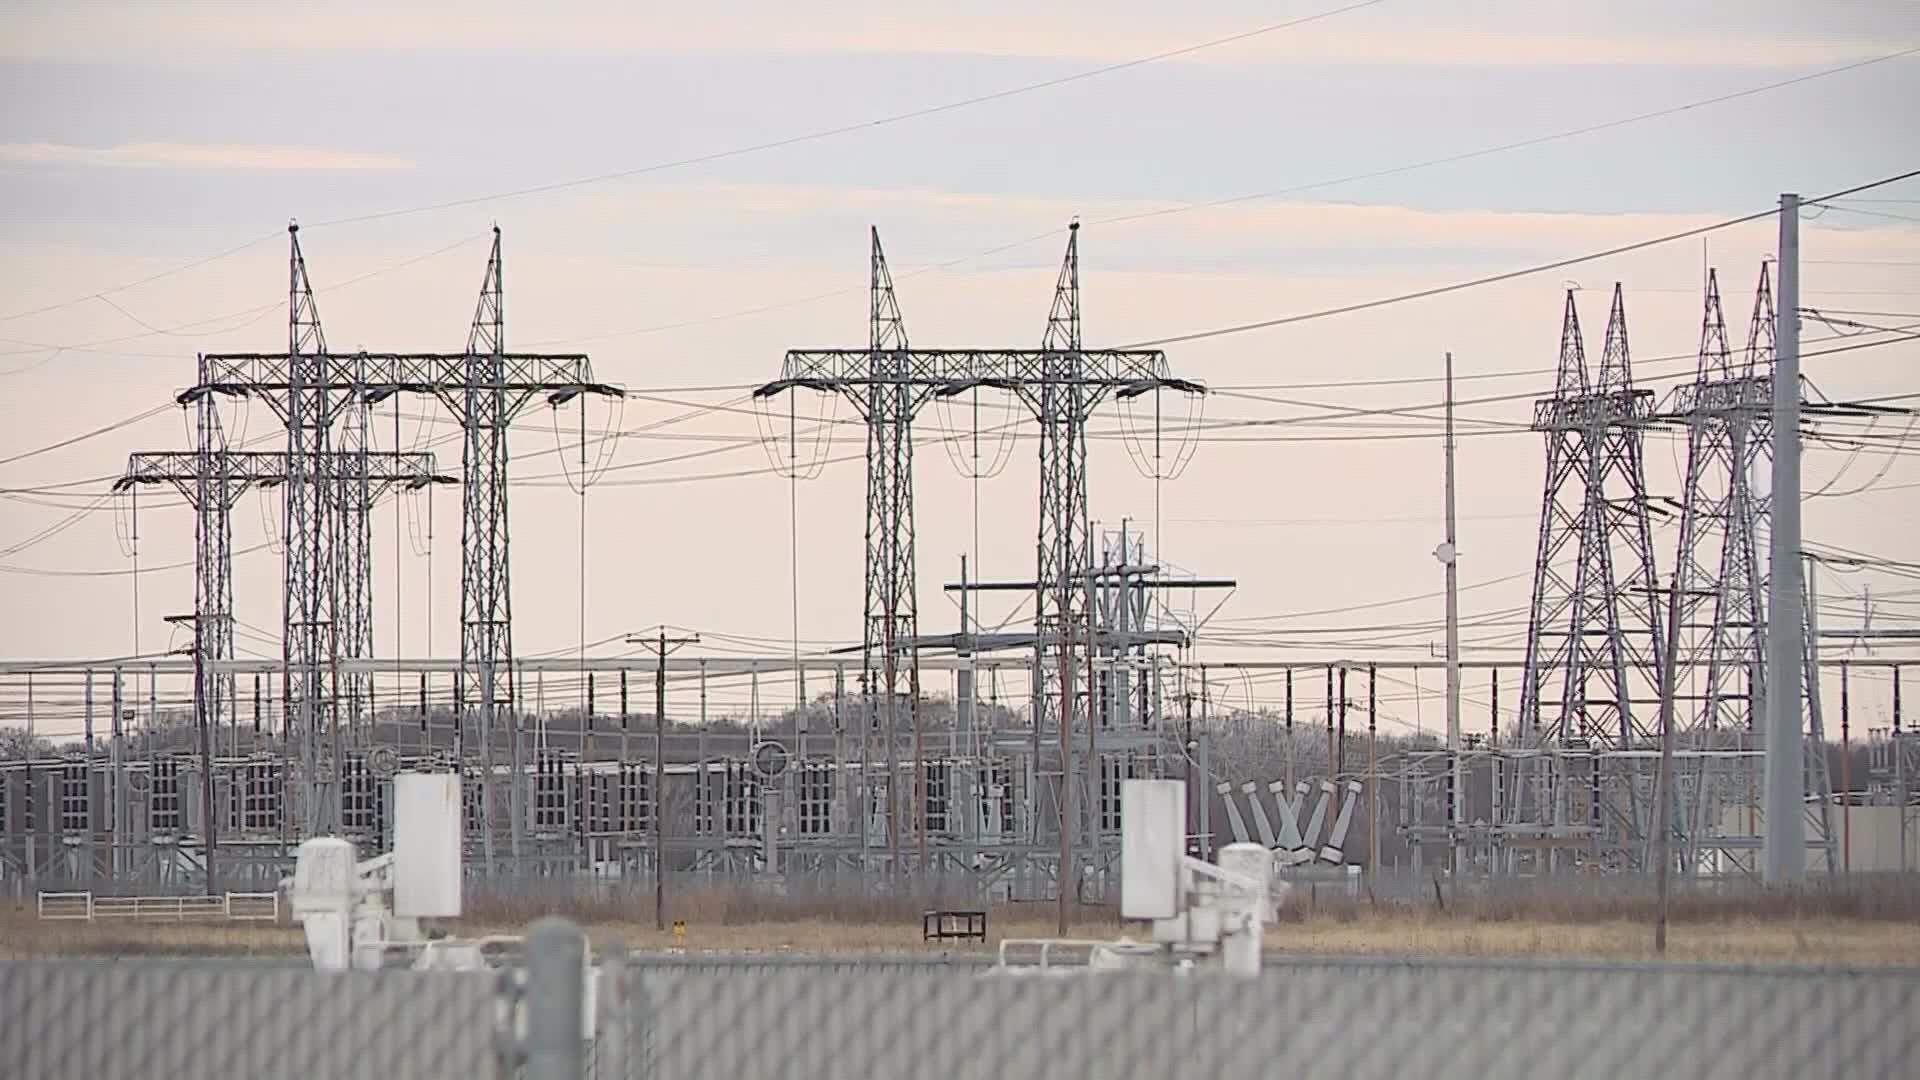 Demand on the grid Friday morning is expected to be the highest level since last year's winter storm. It will give Texas’ energy grid its first major test.